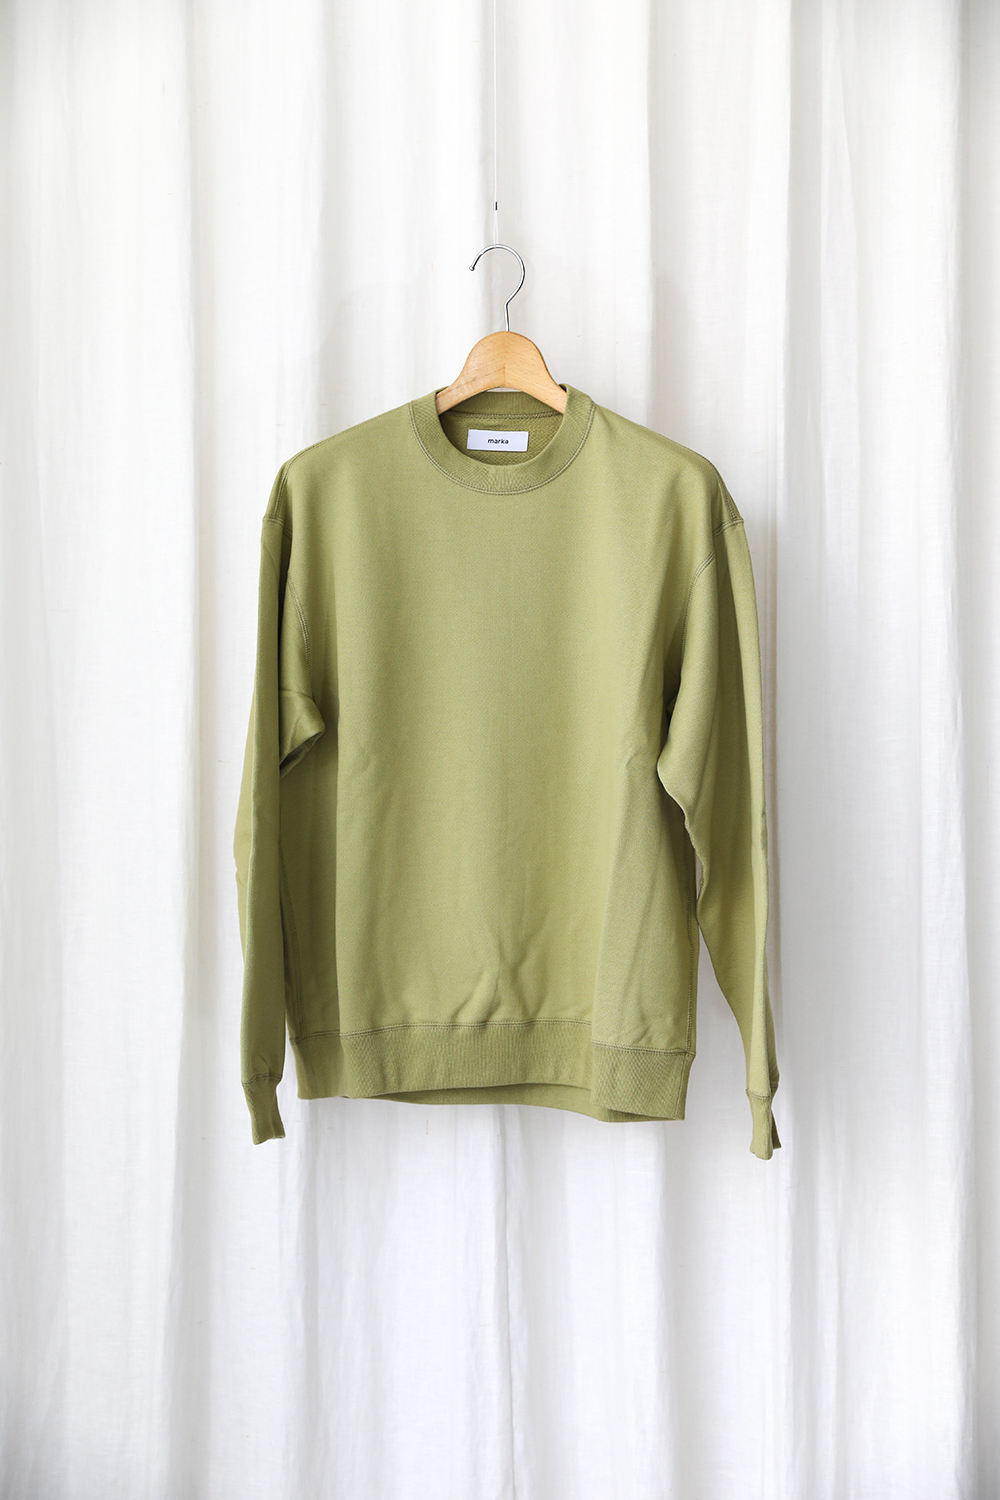 RECYCLE SUVIN ORGANIC COTTON KNIT CREW NECK